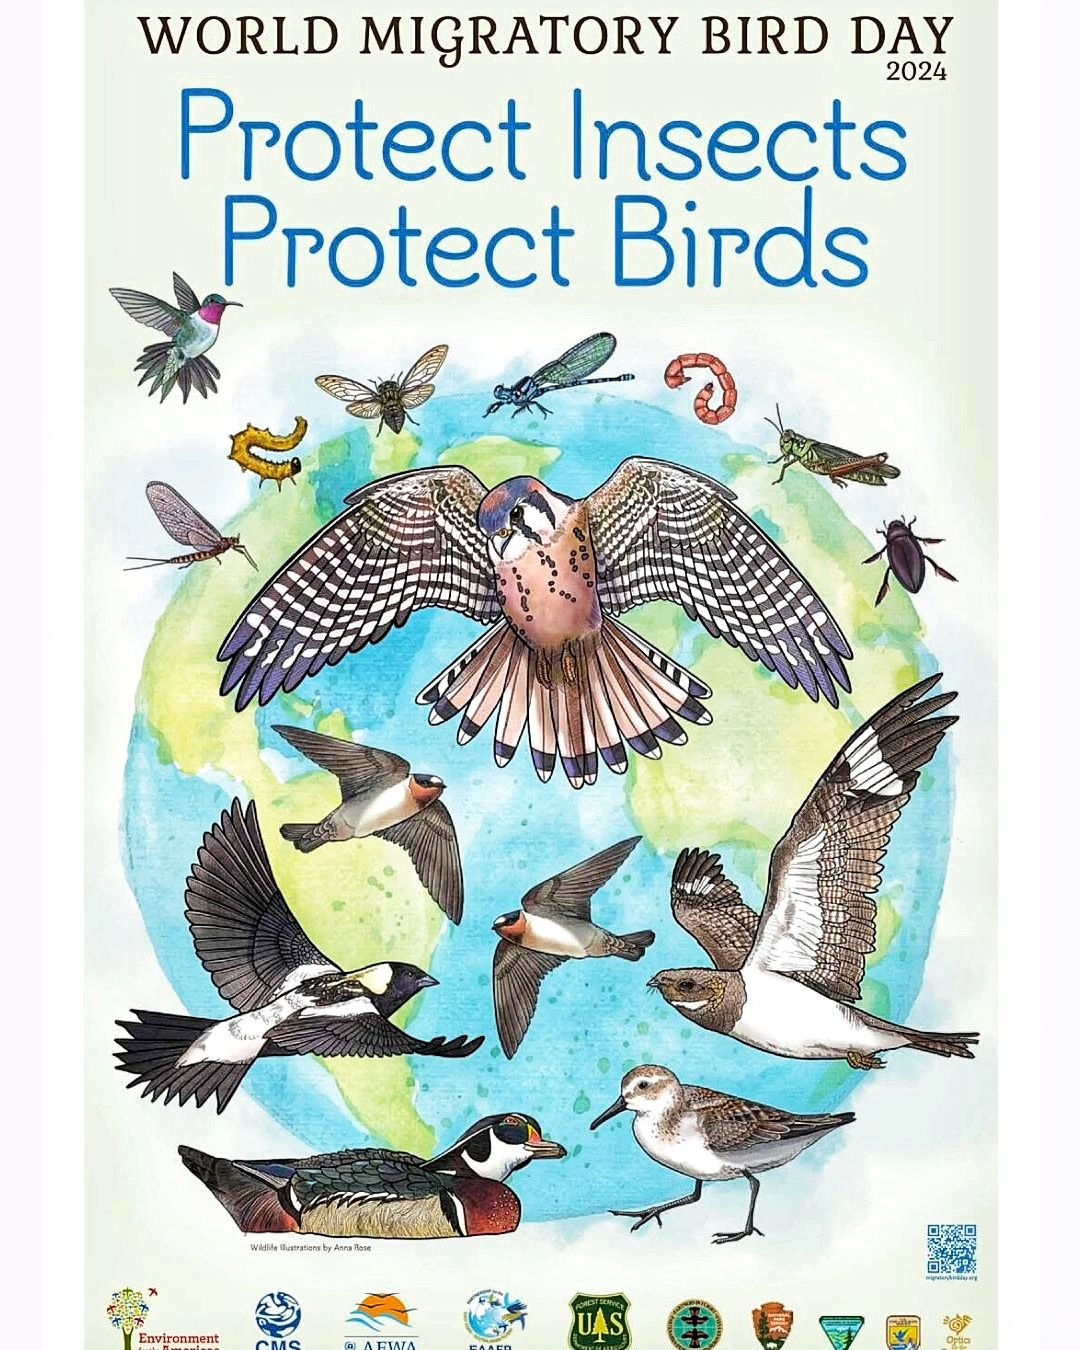 World Migratory Bird Day 2024 is May 11! The theme PROTECT INSECTS PROTECT BIRDS shines a spotlight on the relationship between migratory birds and insects amidst ALARMING declines for both. Birds need insects!
🌎 All across the world, people are tak